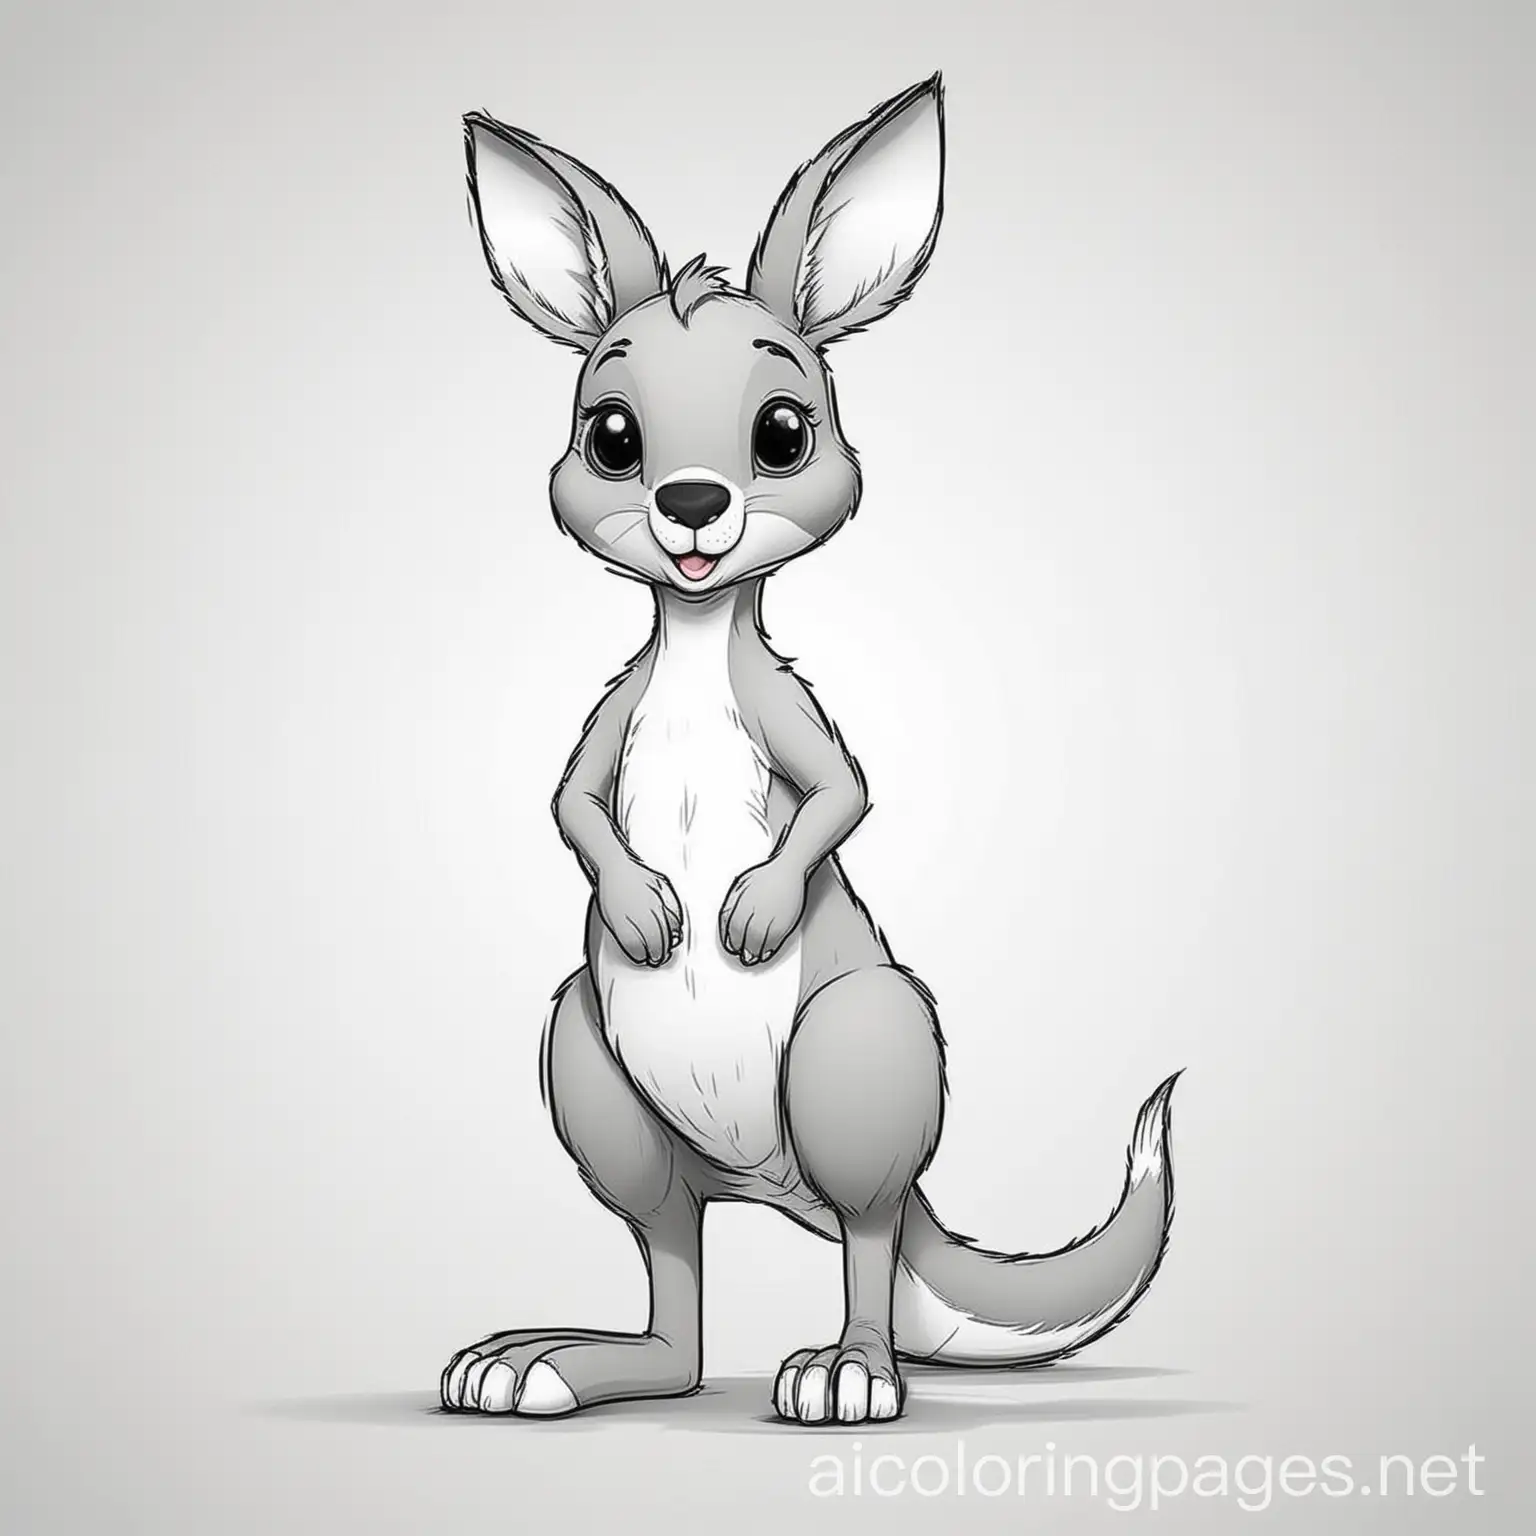 happy funny cute cartoon  kangaroo standing side view, Coloring Page, black and white, line art, white background, Simplicity, Ample White Space. The background of the coloring page is plain white to make it easy for young children to color within the lines. The outlines of all the subjects are easy to distinguish, making it simple for kids to color without too much difficulty